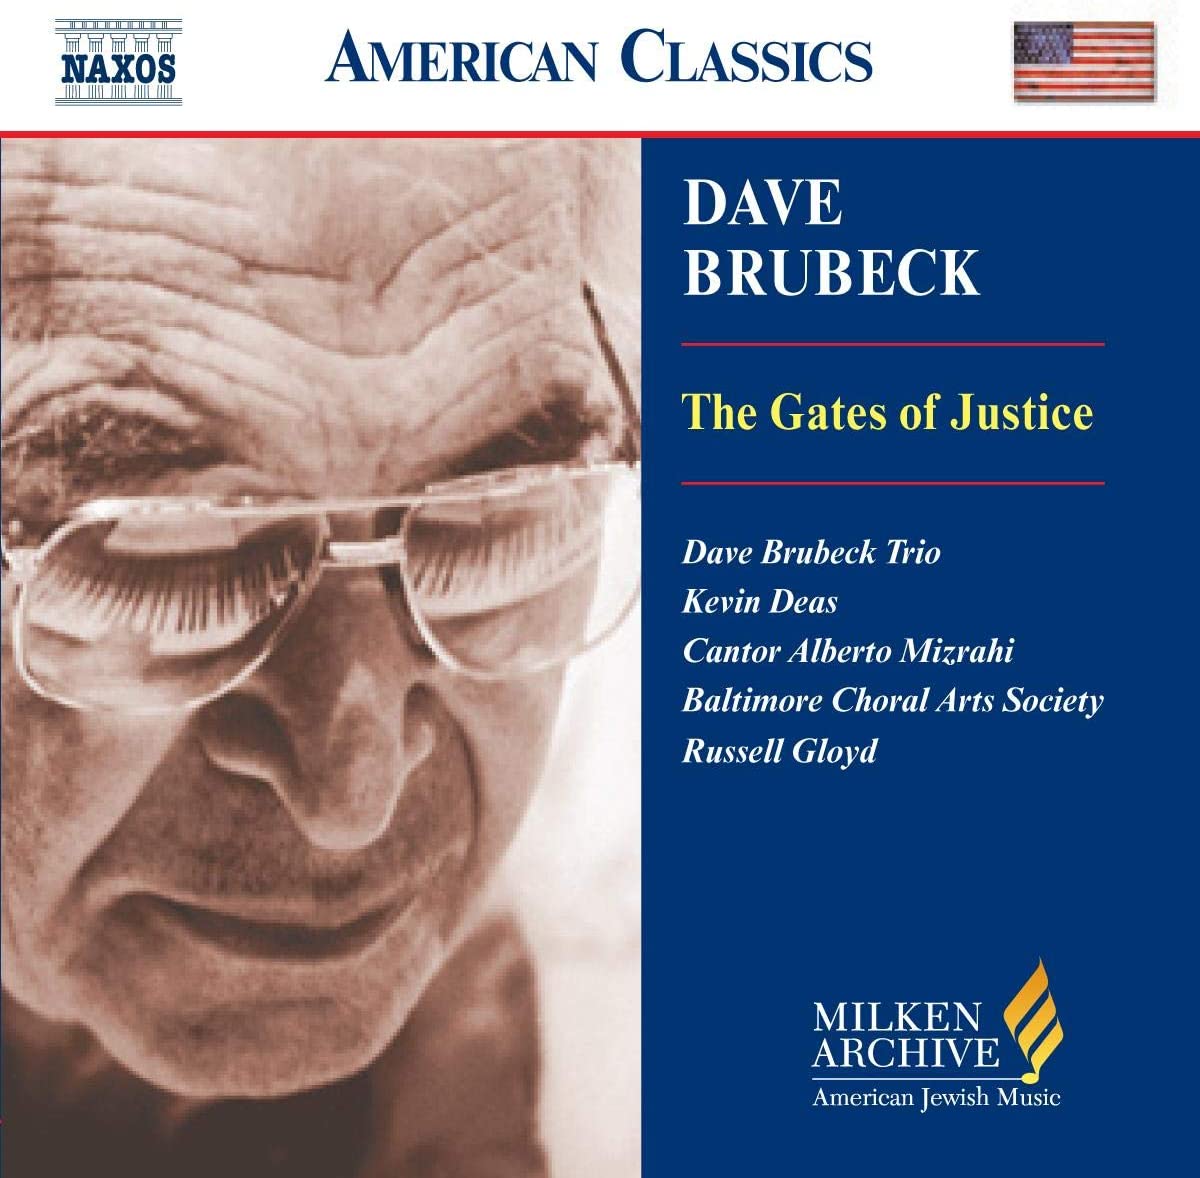 BRUBECK: The gates of justice